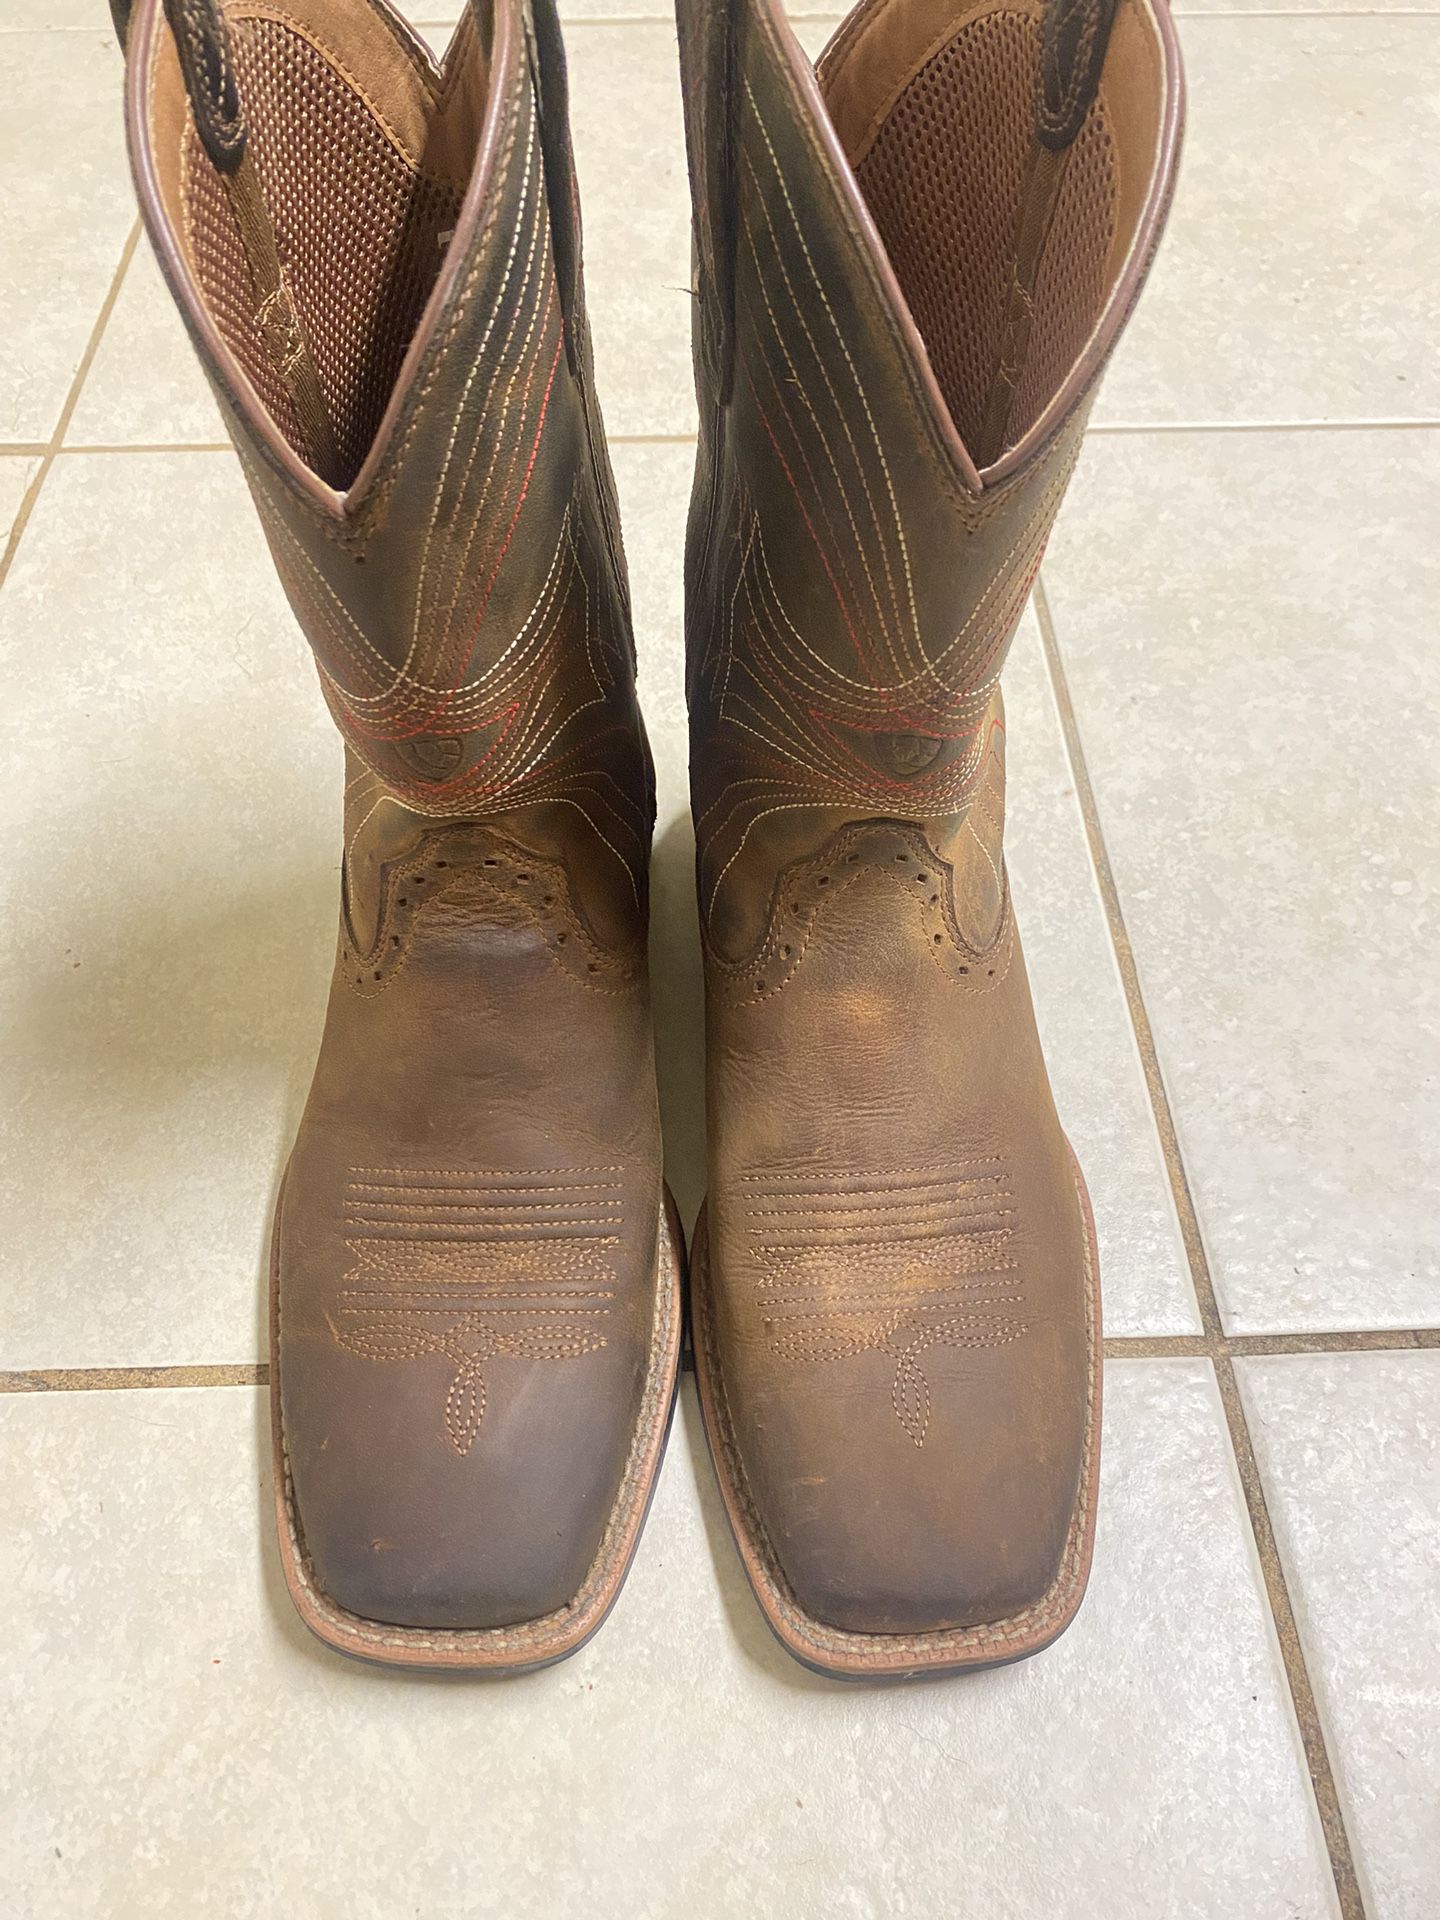 Ariat, Boots Size: 7  (used) Normal Wear , Brown. 